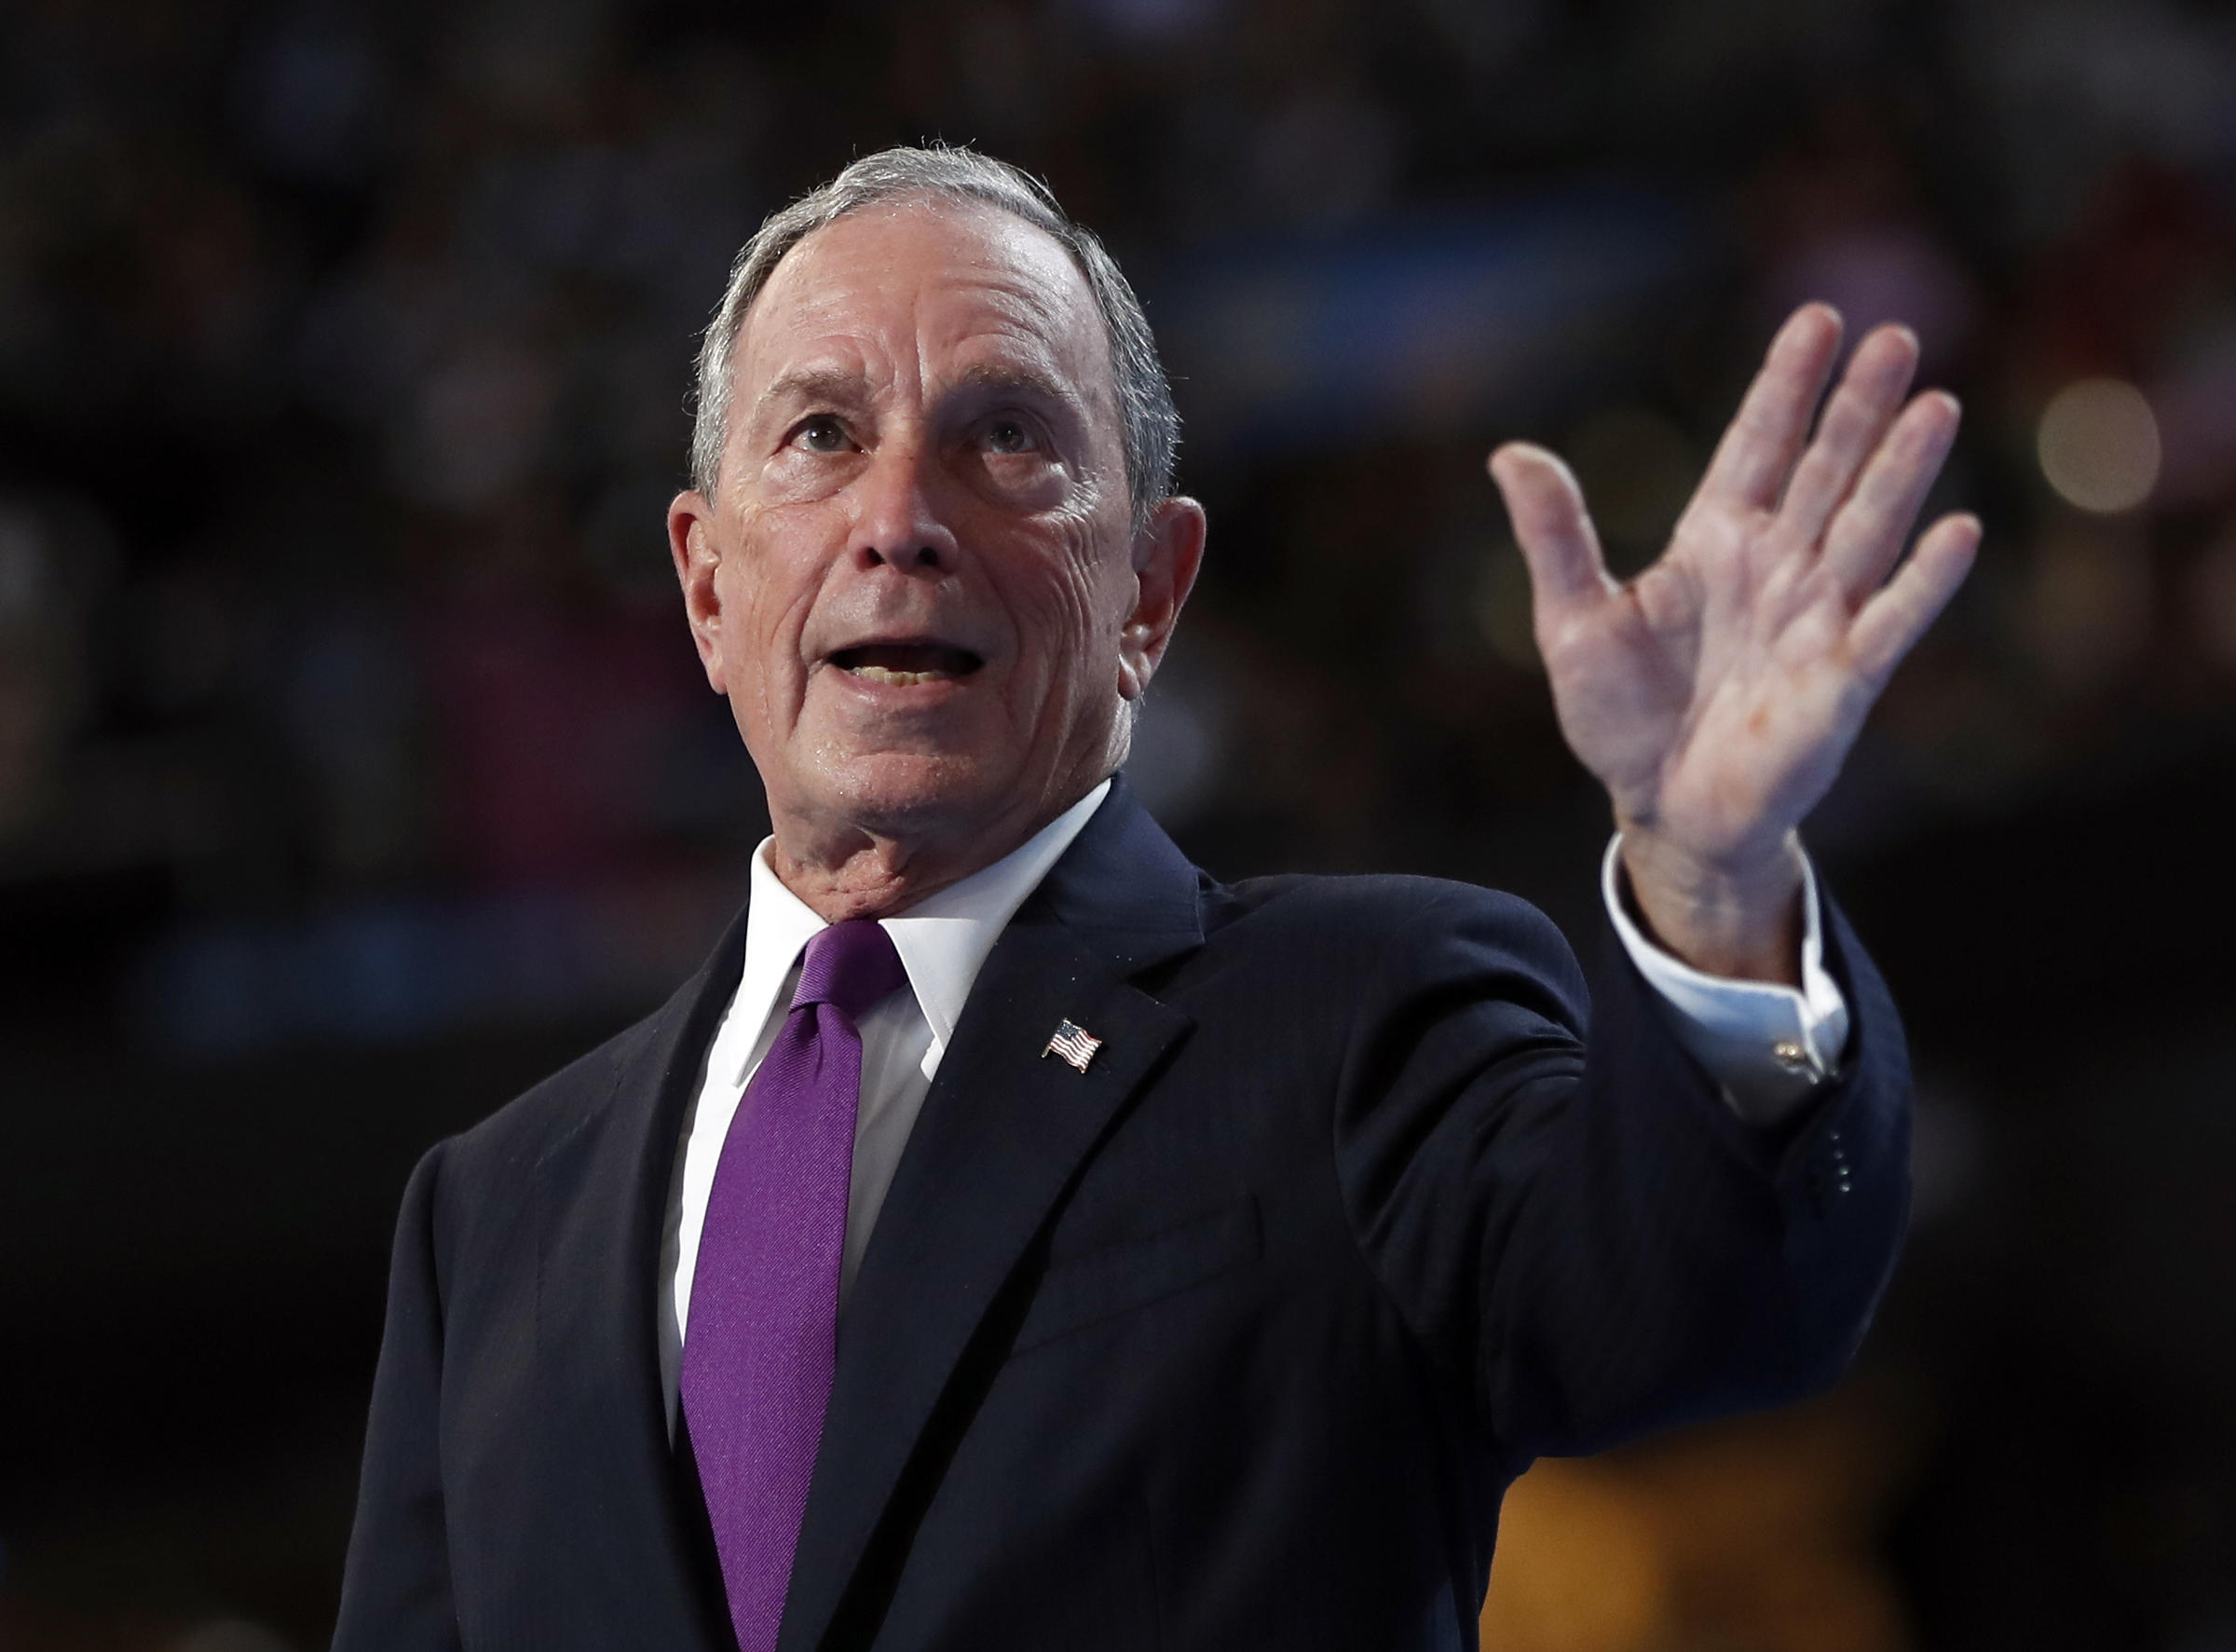 Bloomberg signs one big check and outspends NRA eightfold